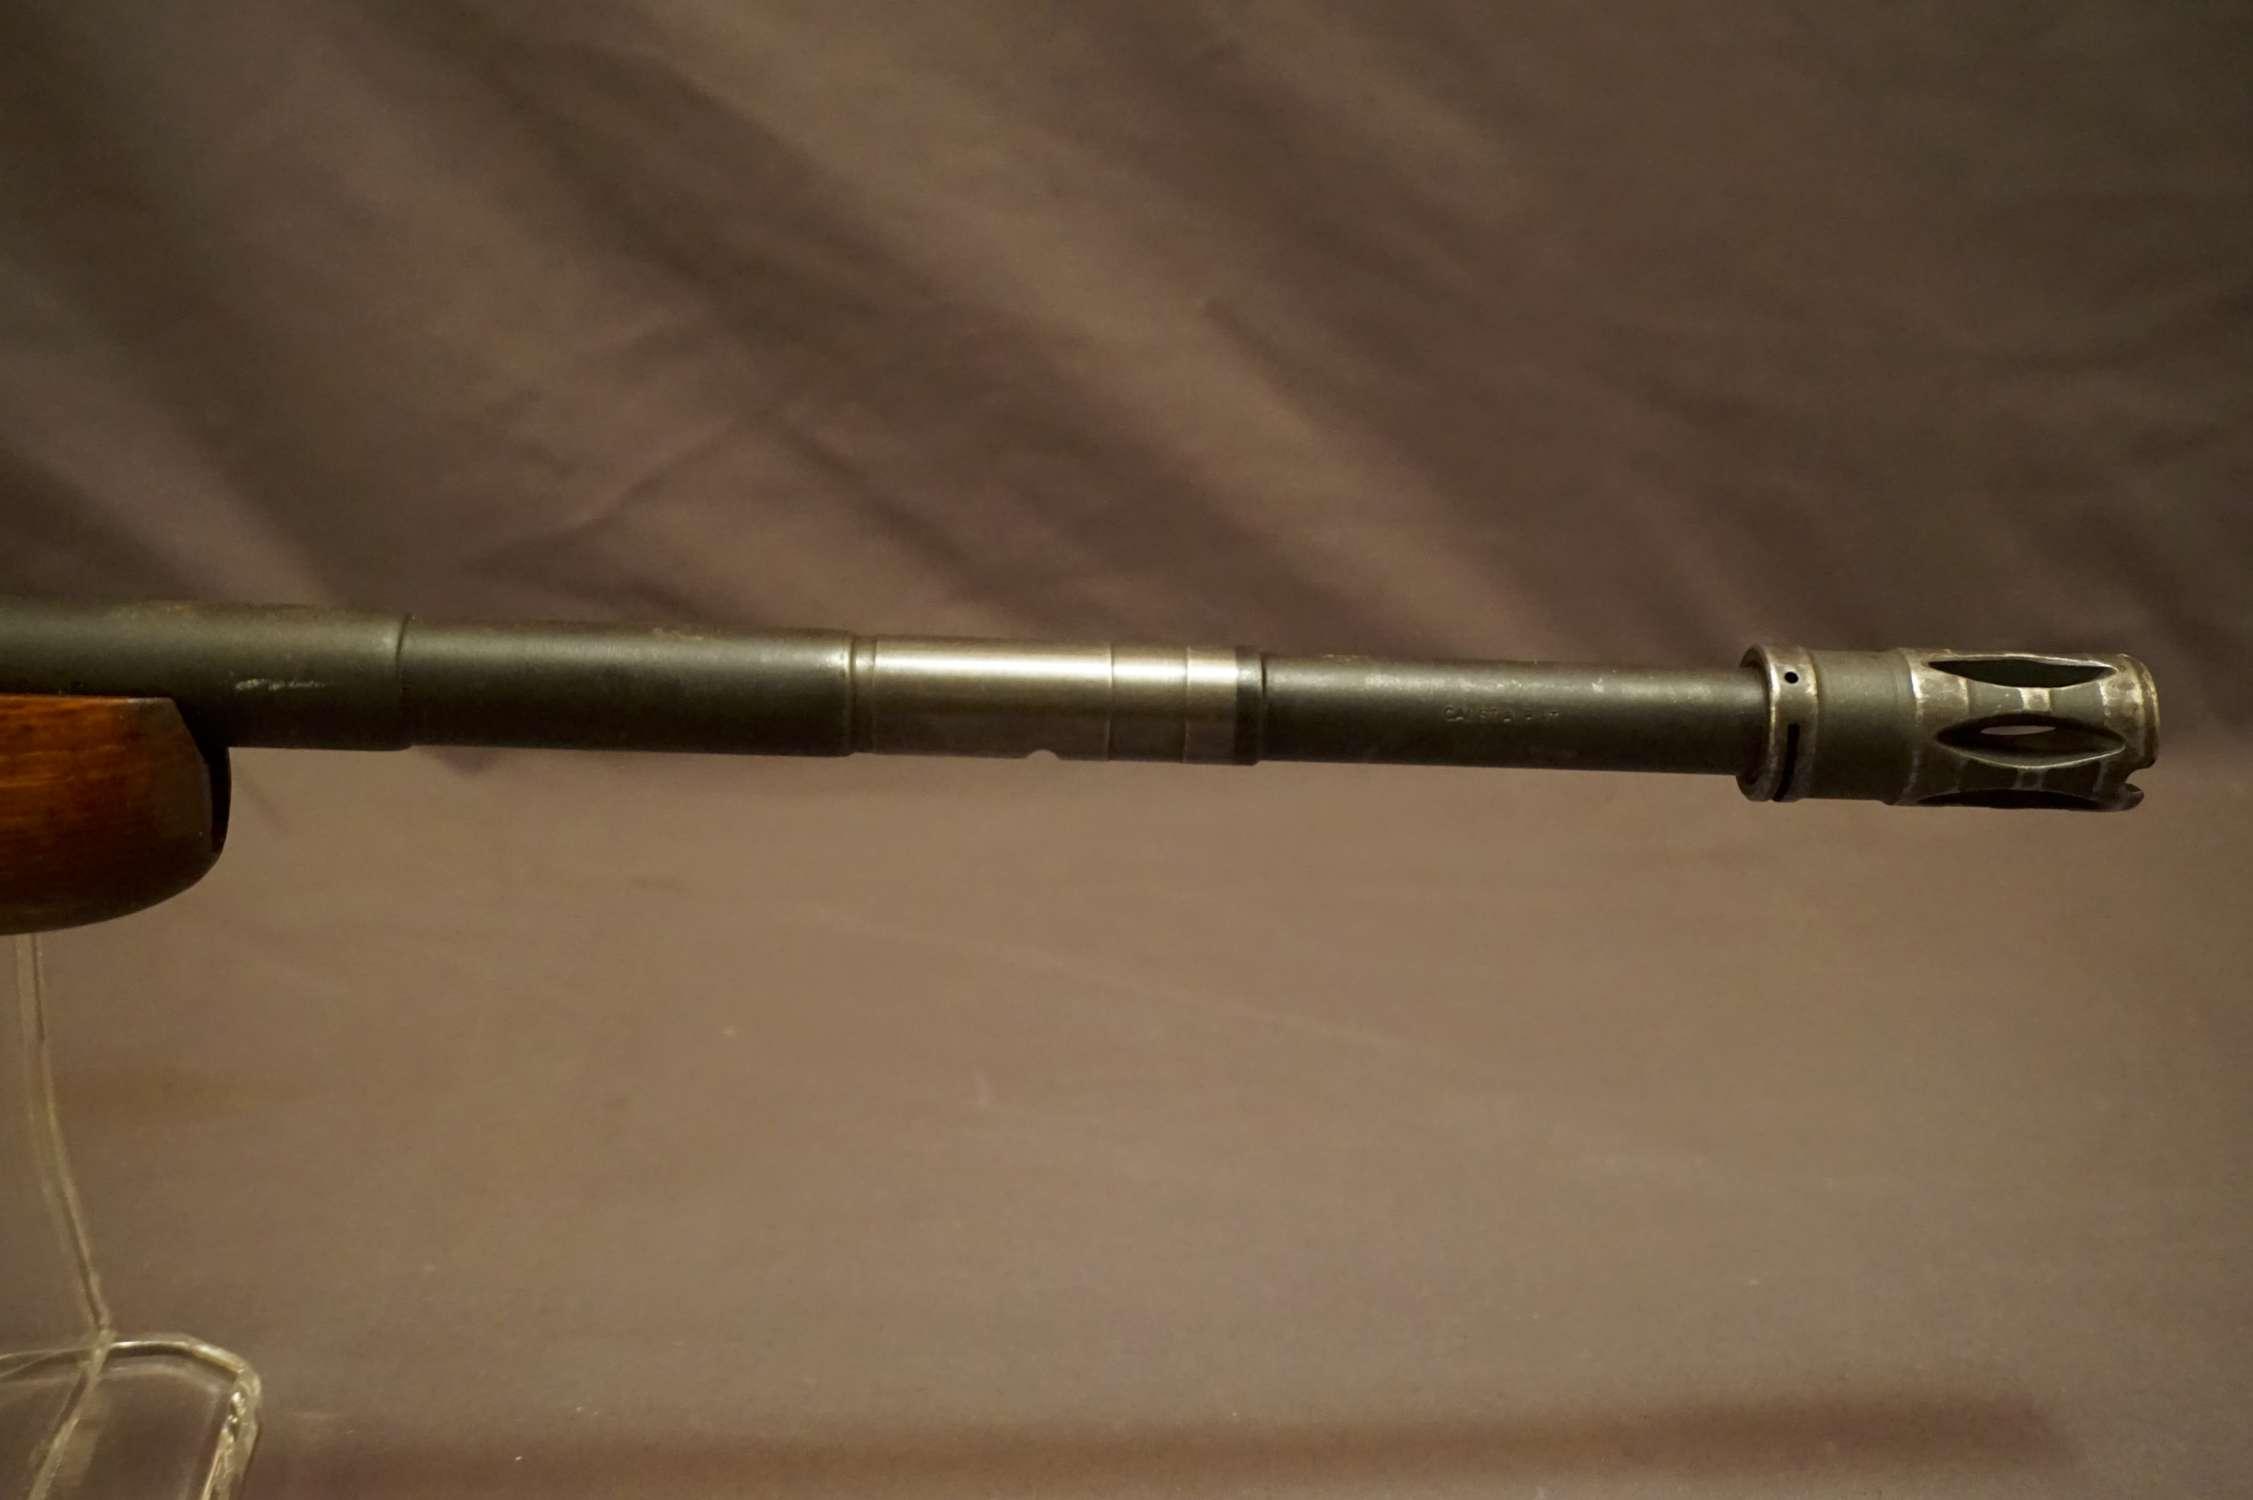 Sportorized Mauser Type Action Unknown Maker 7.62mm B/A Rifle